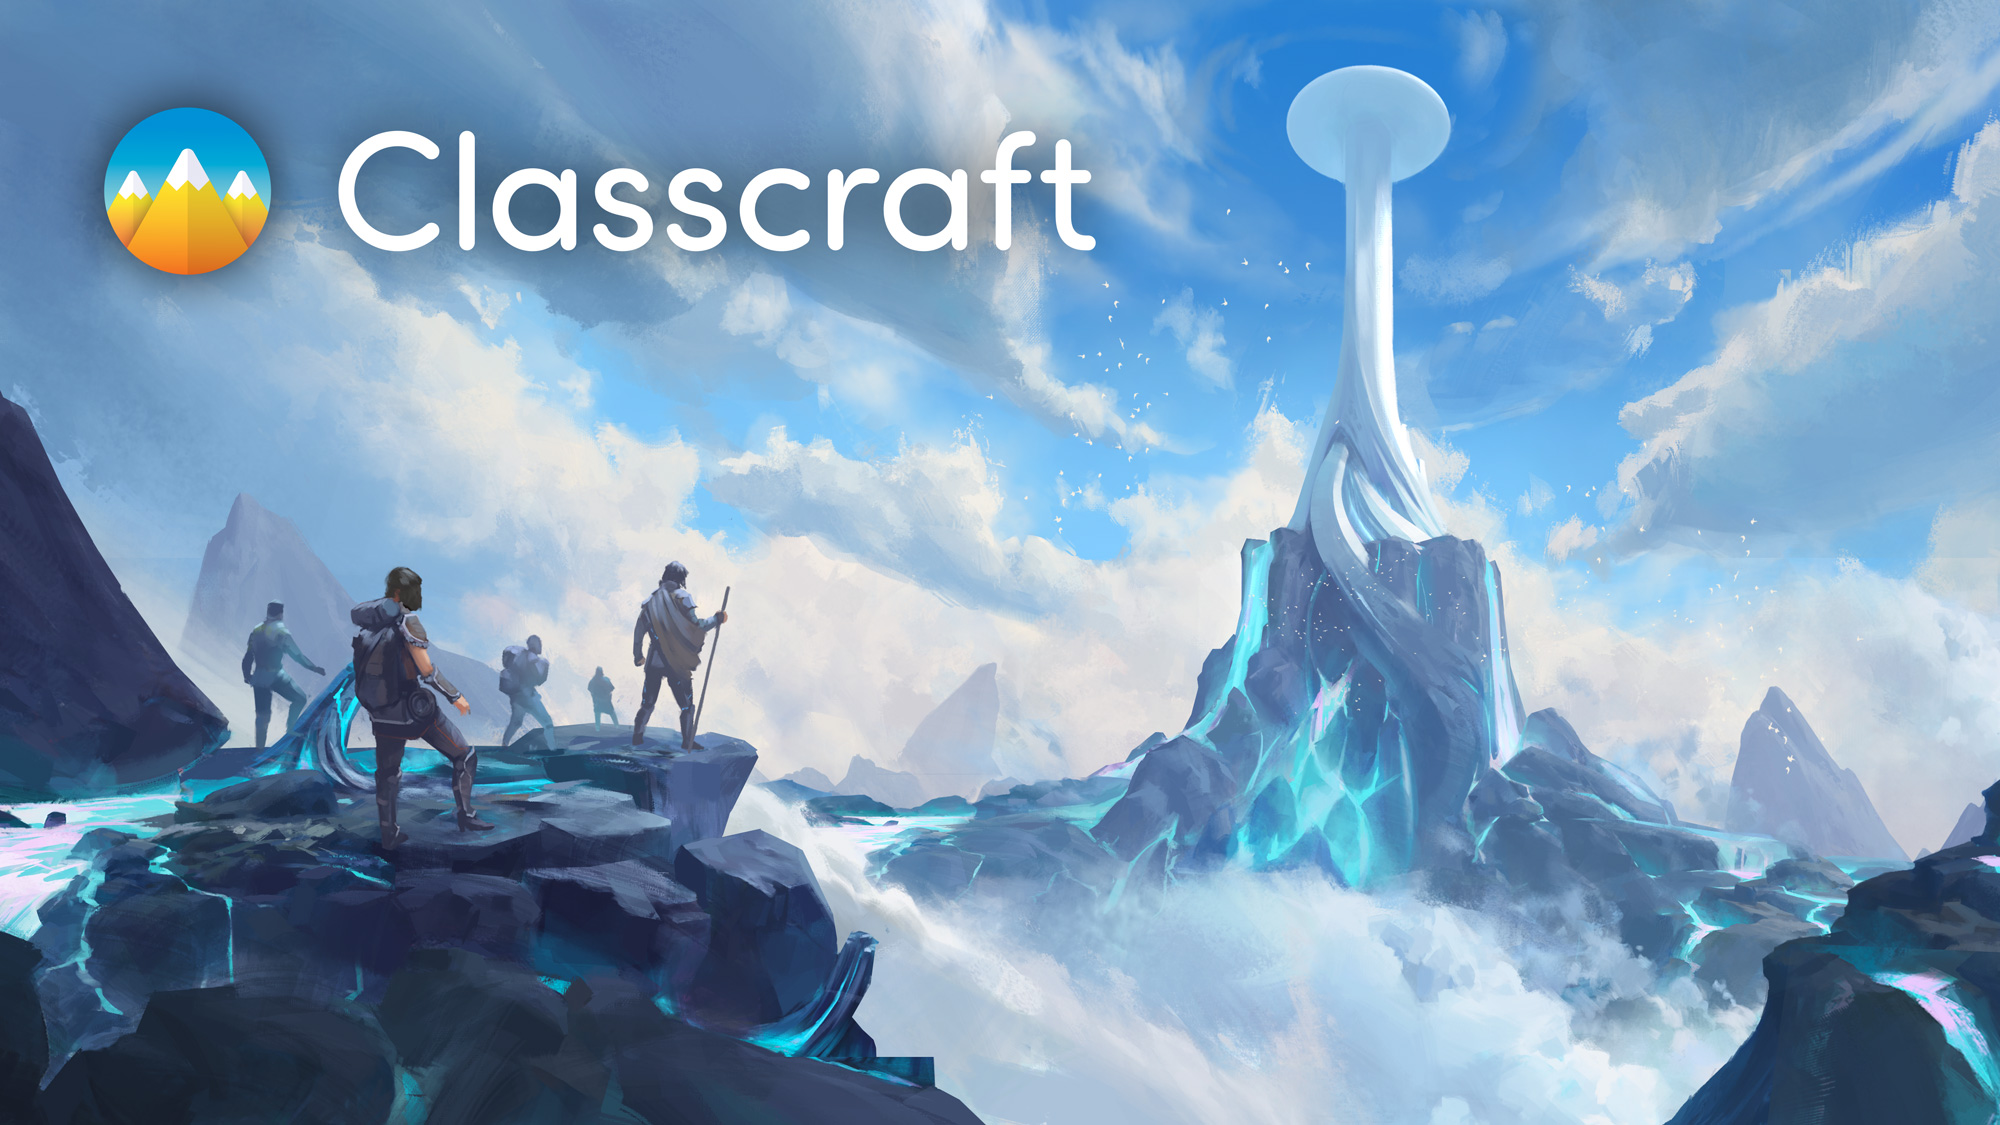 Classcraft: Season 1 will premiere during Back to School 2019, with a new episode released each month. Teachers can use it as a year-long adventure to complement their existing lessons, creating deeper student engagement. 